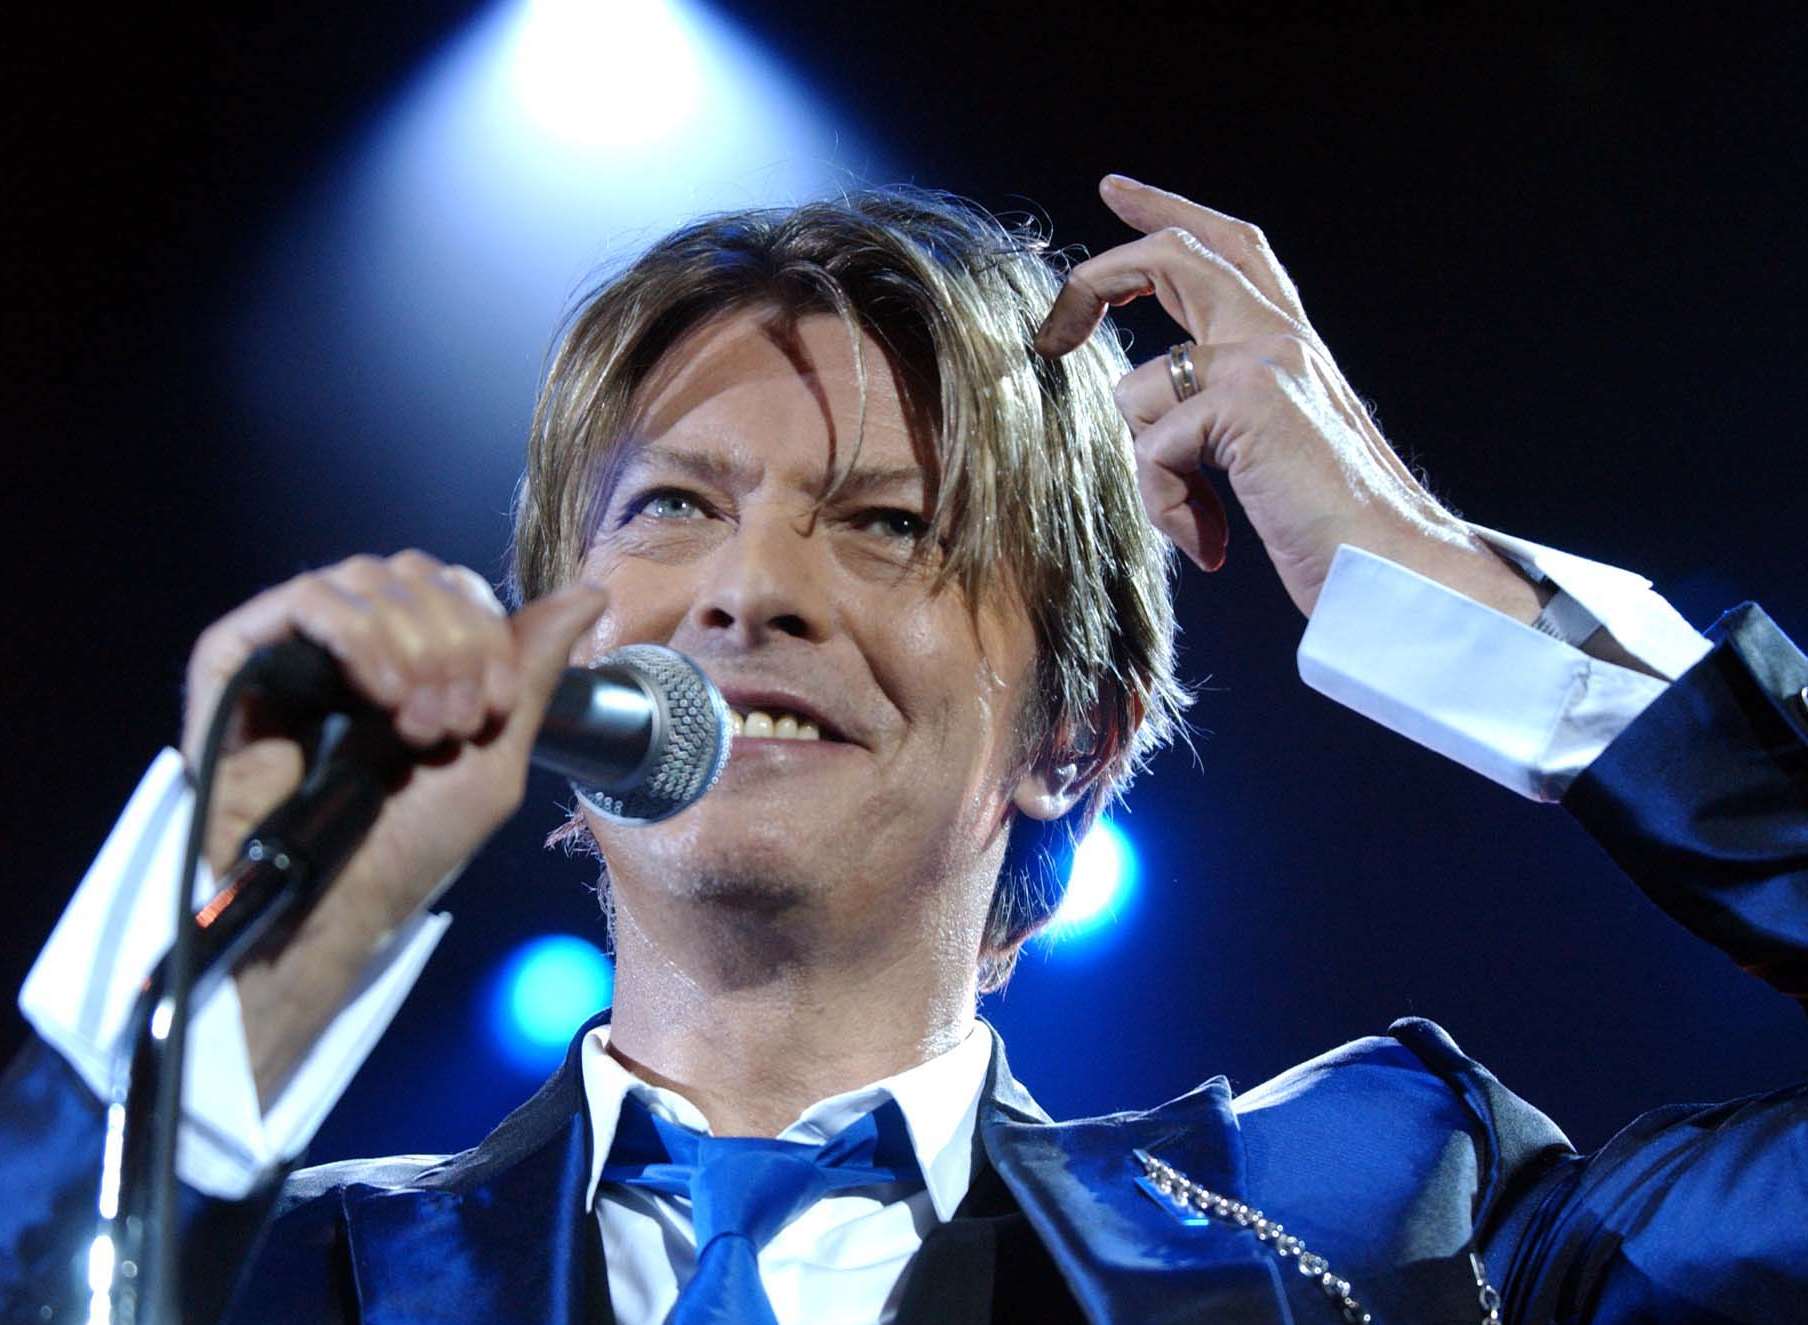 David Bowie died in January last year